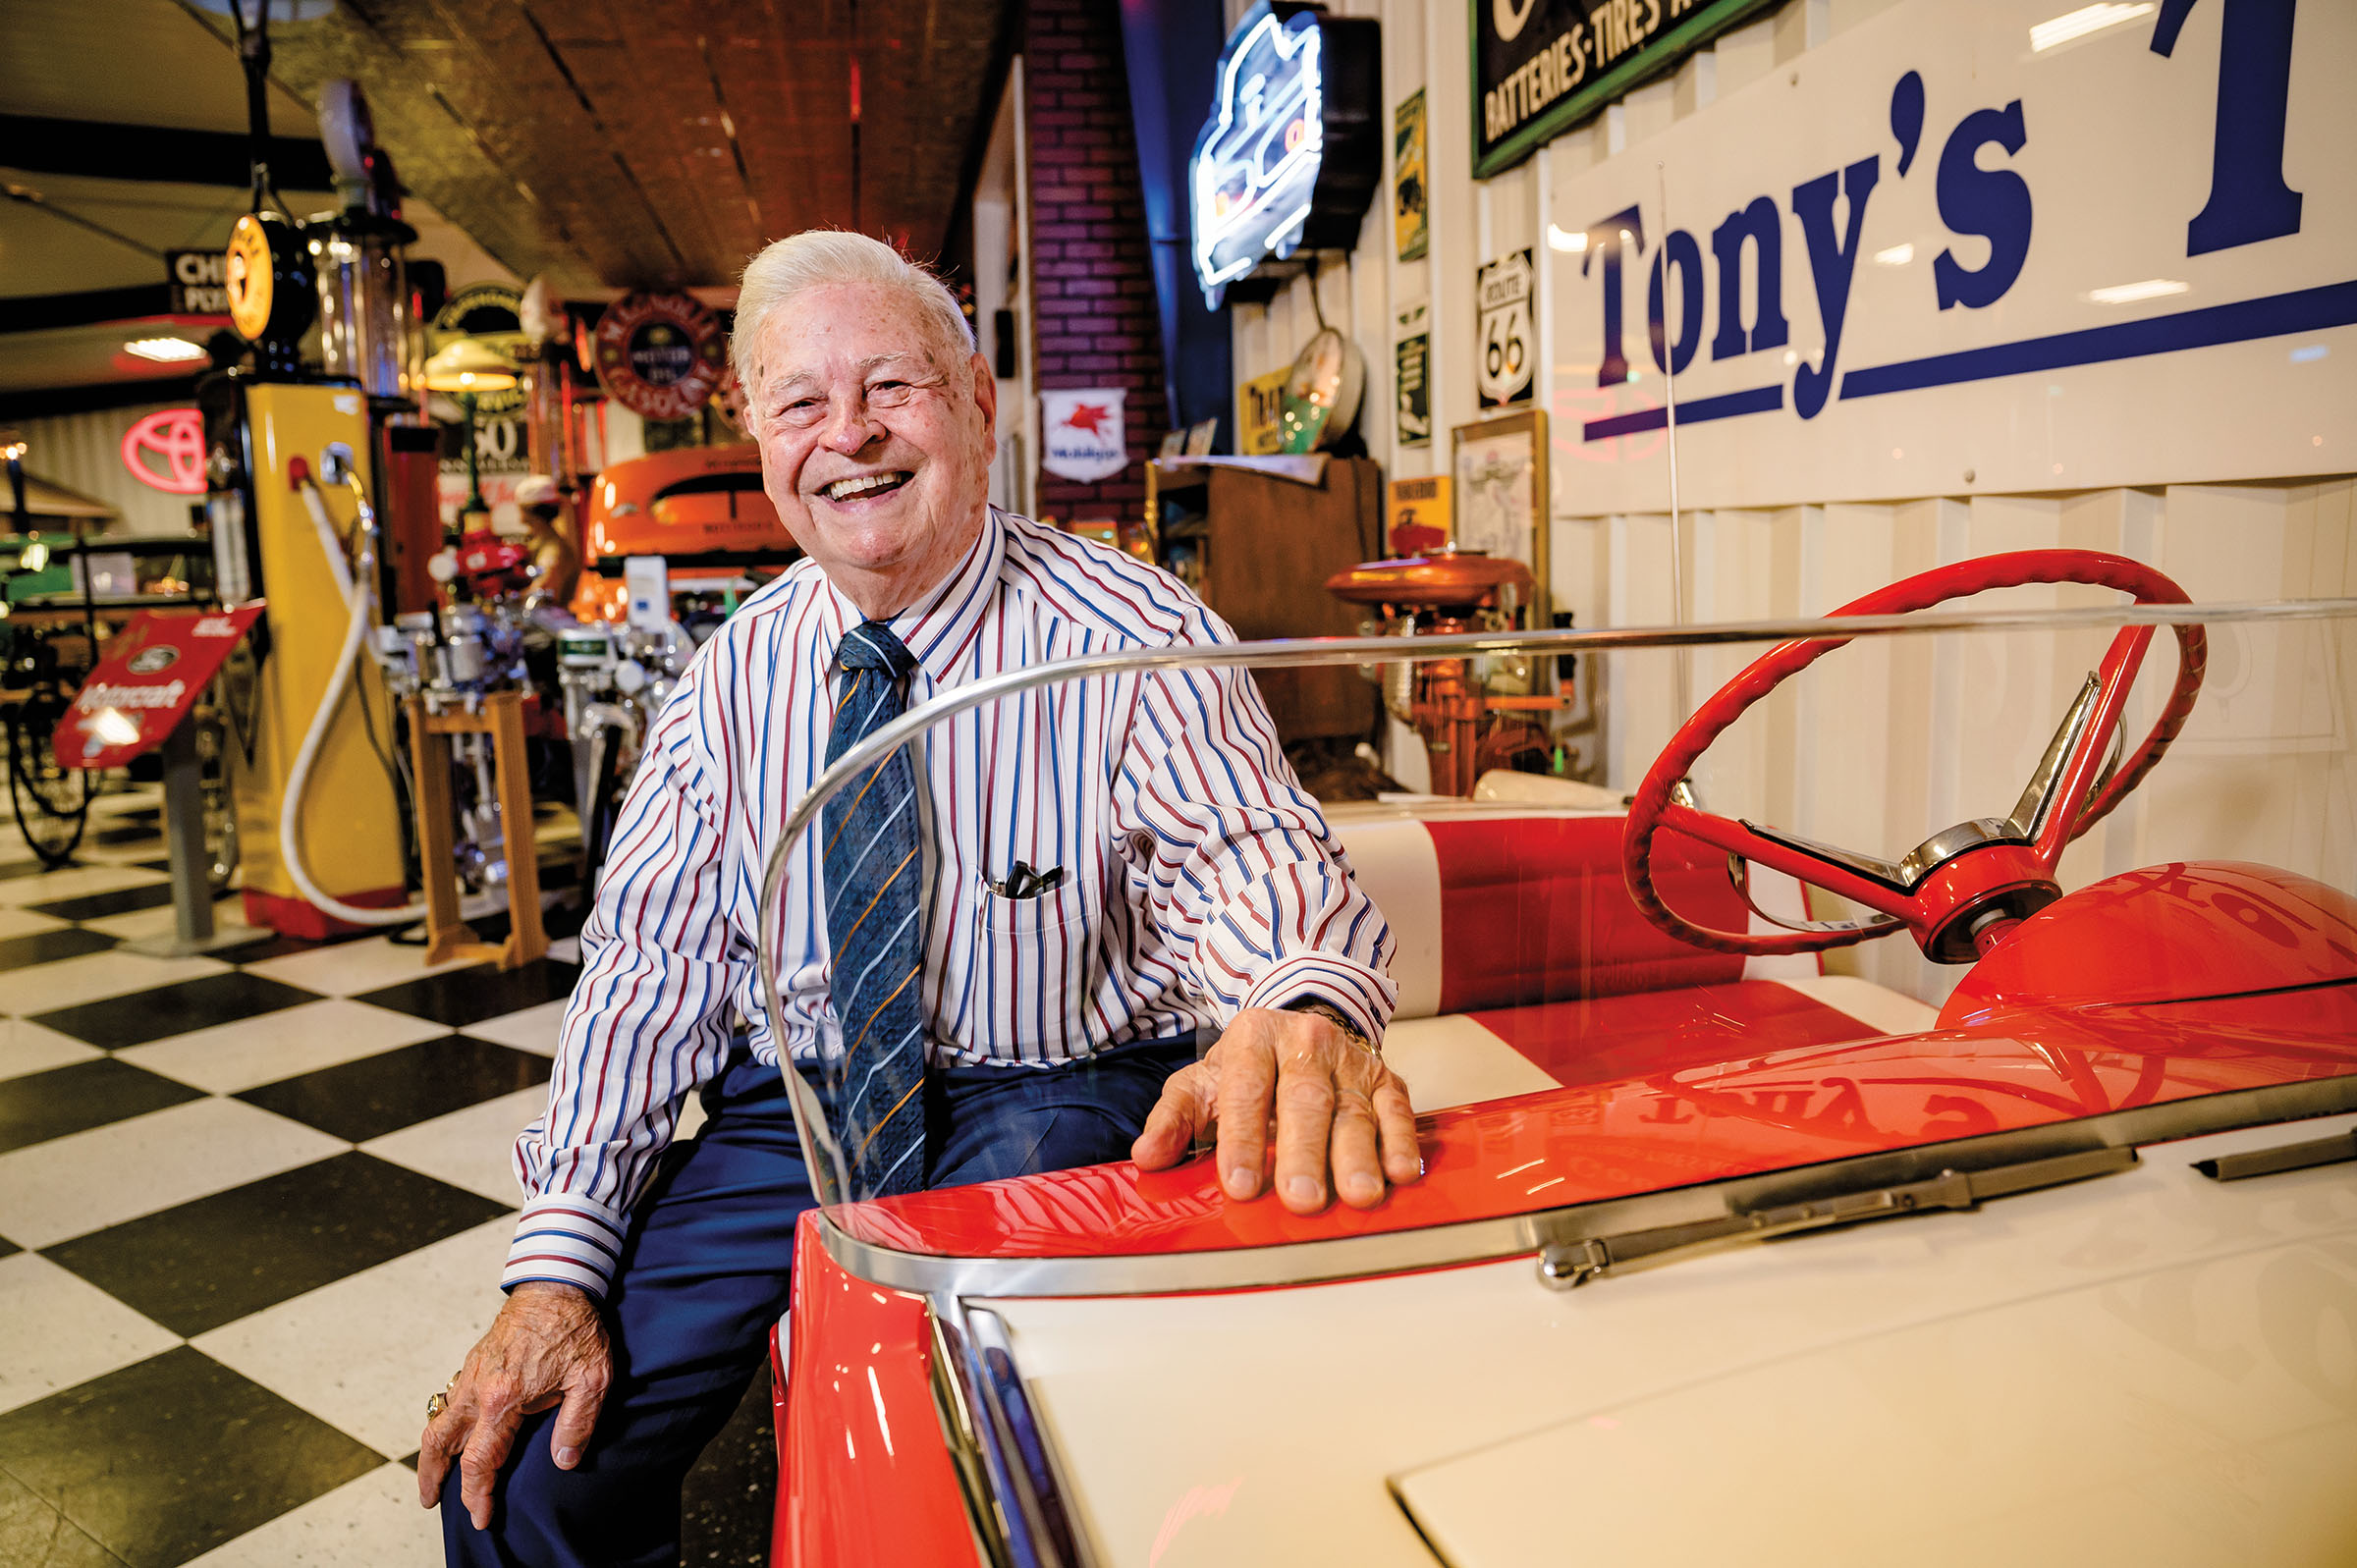 An old man in a striped shirt and tie sits in a red classic car laughing